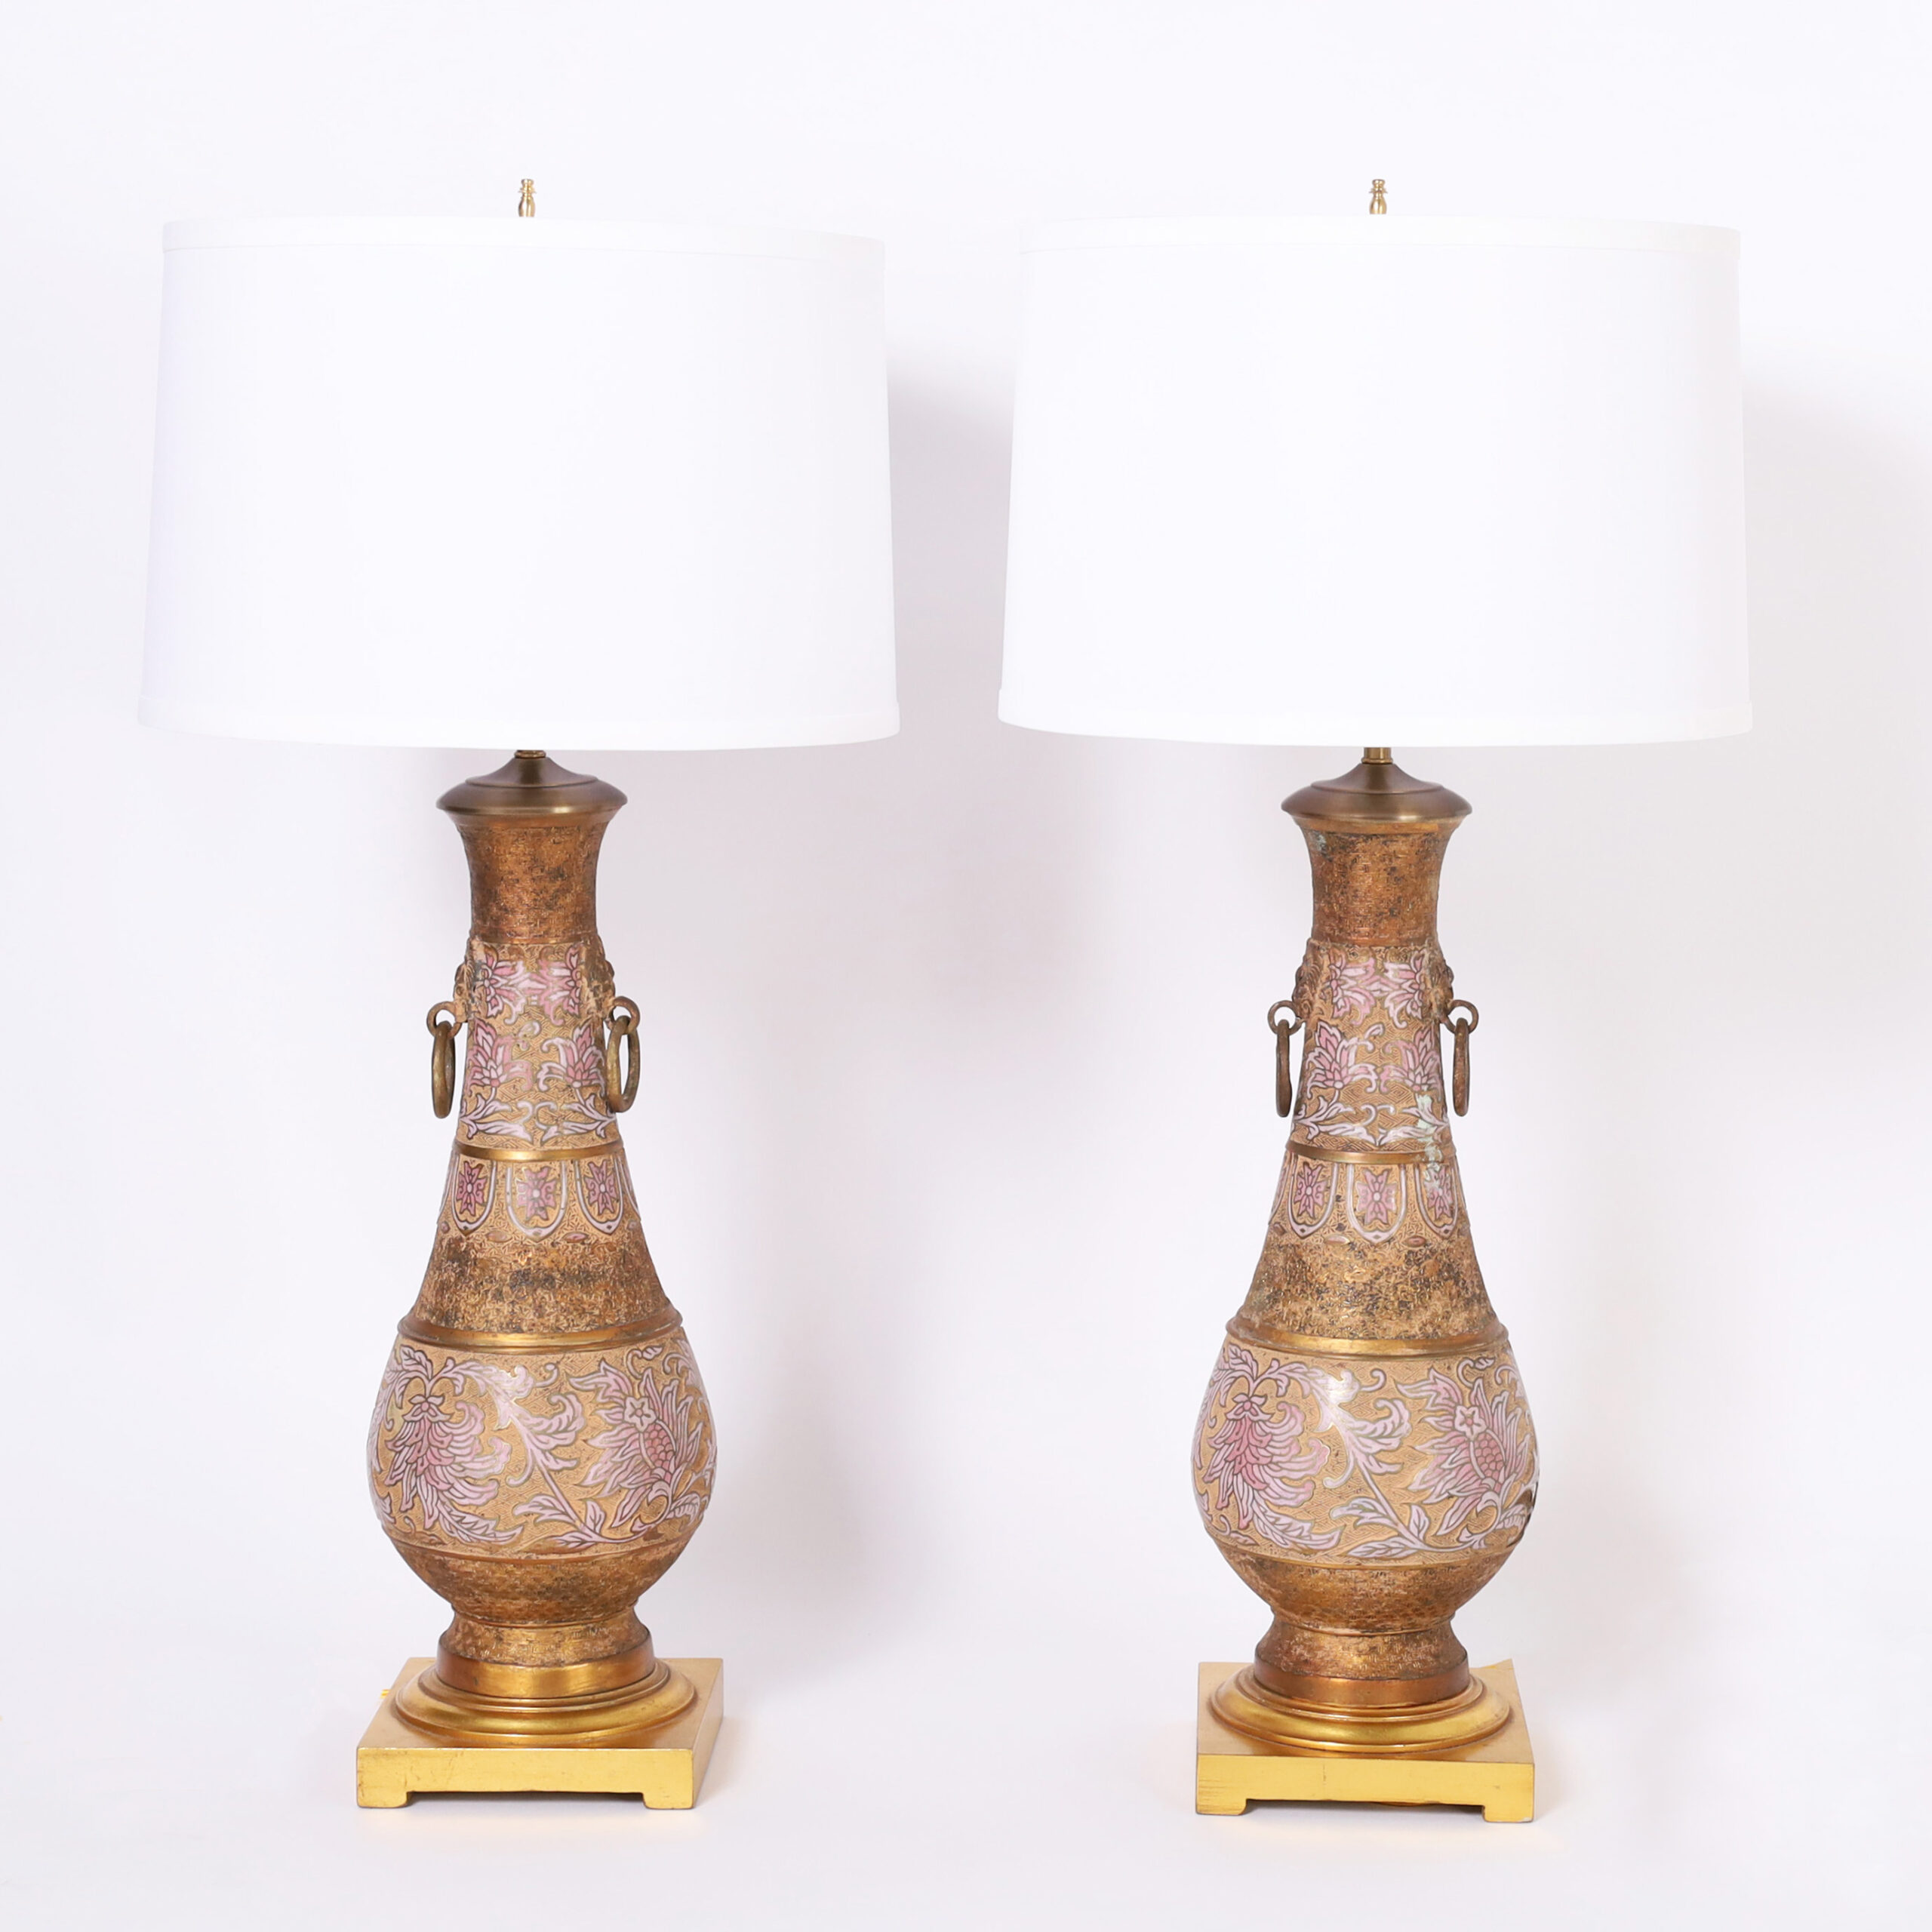 Pair of Anglo Indian Brass and Enamel Table Lamps